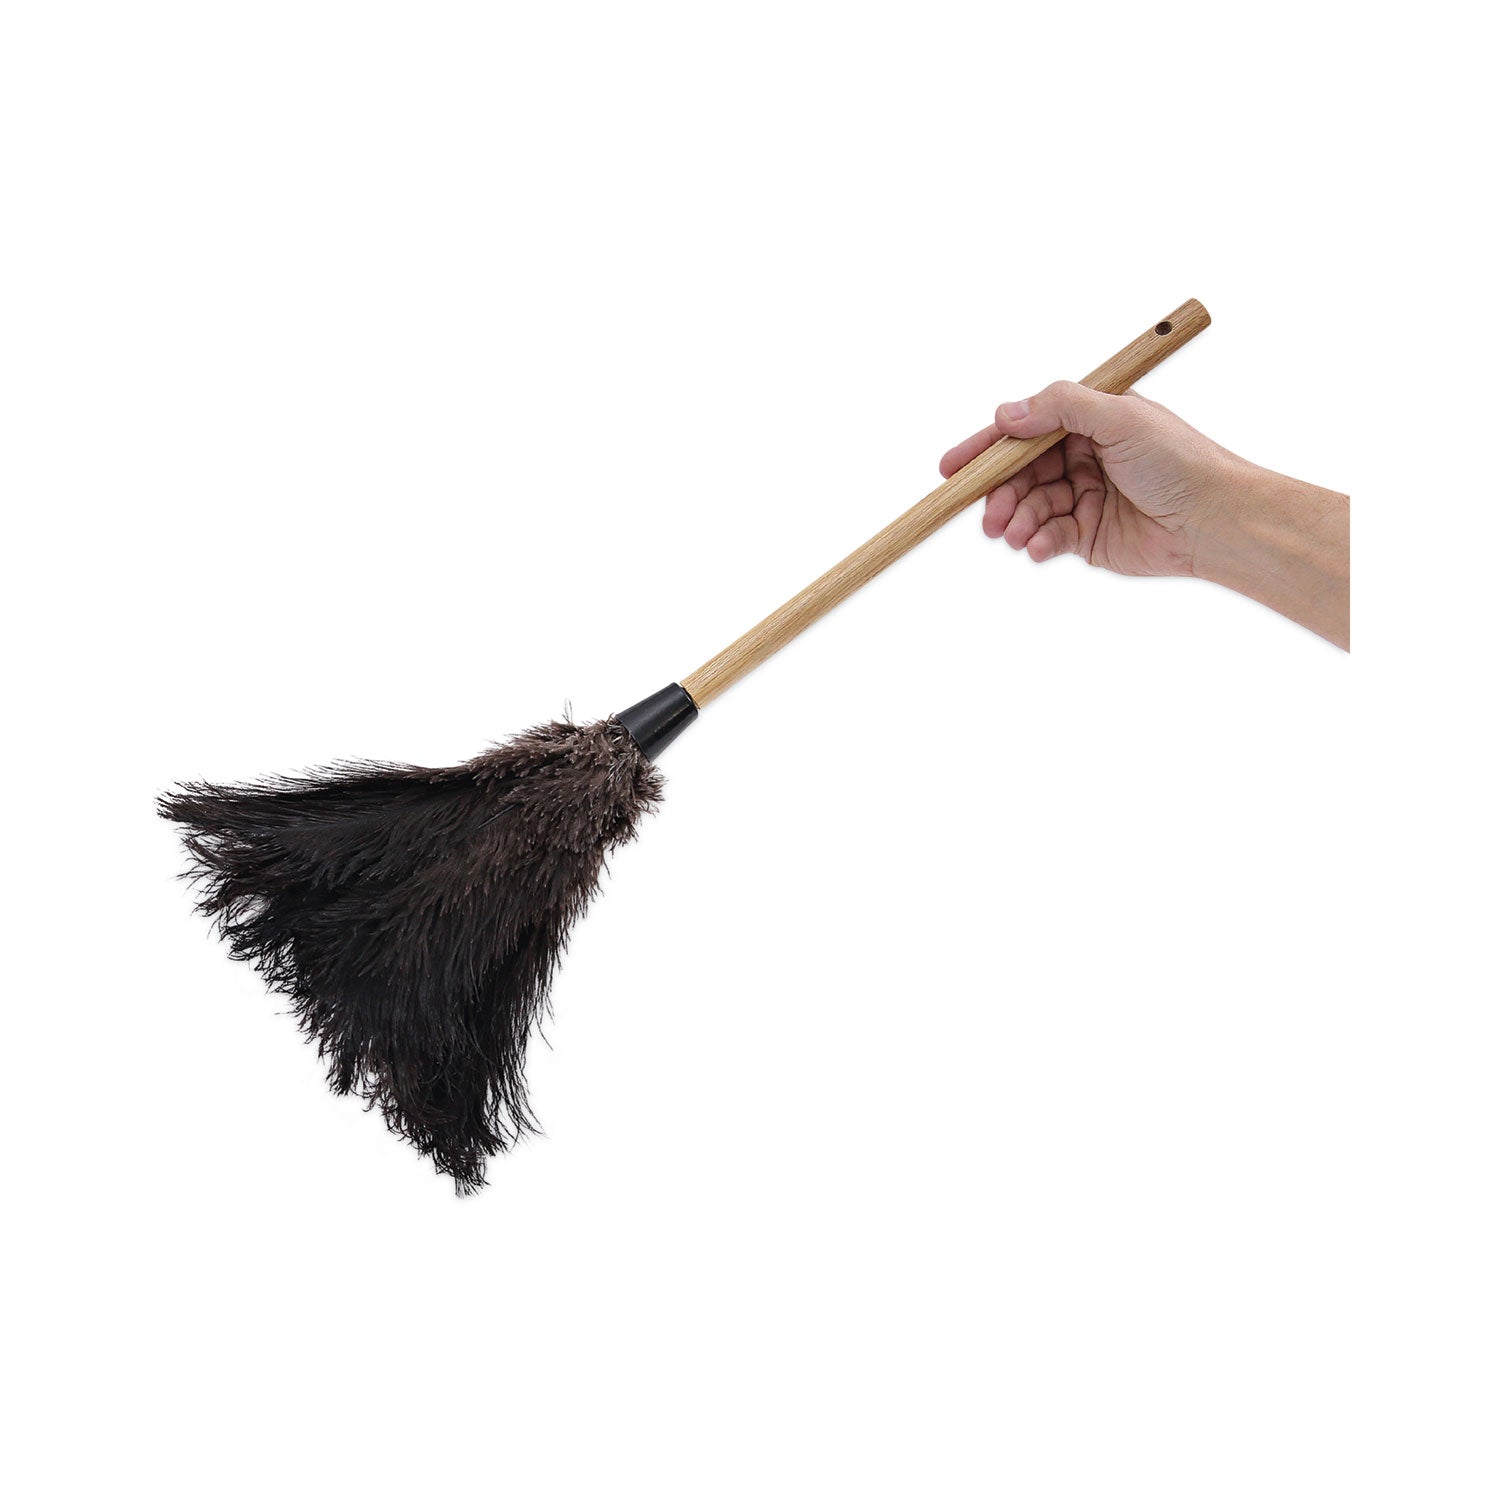 professional-ostrich-feather-duster-10-handle_bwk20bk - 6